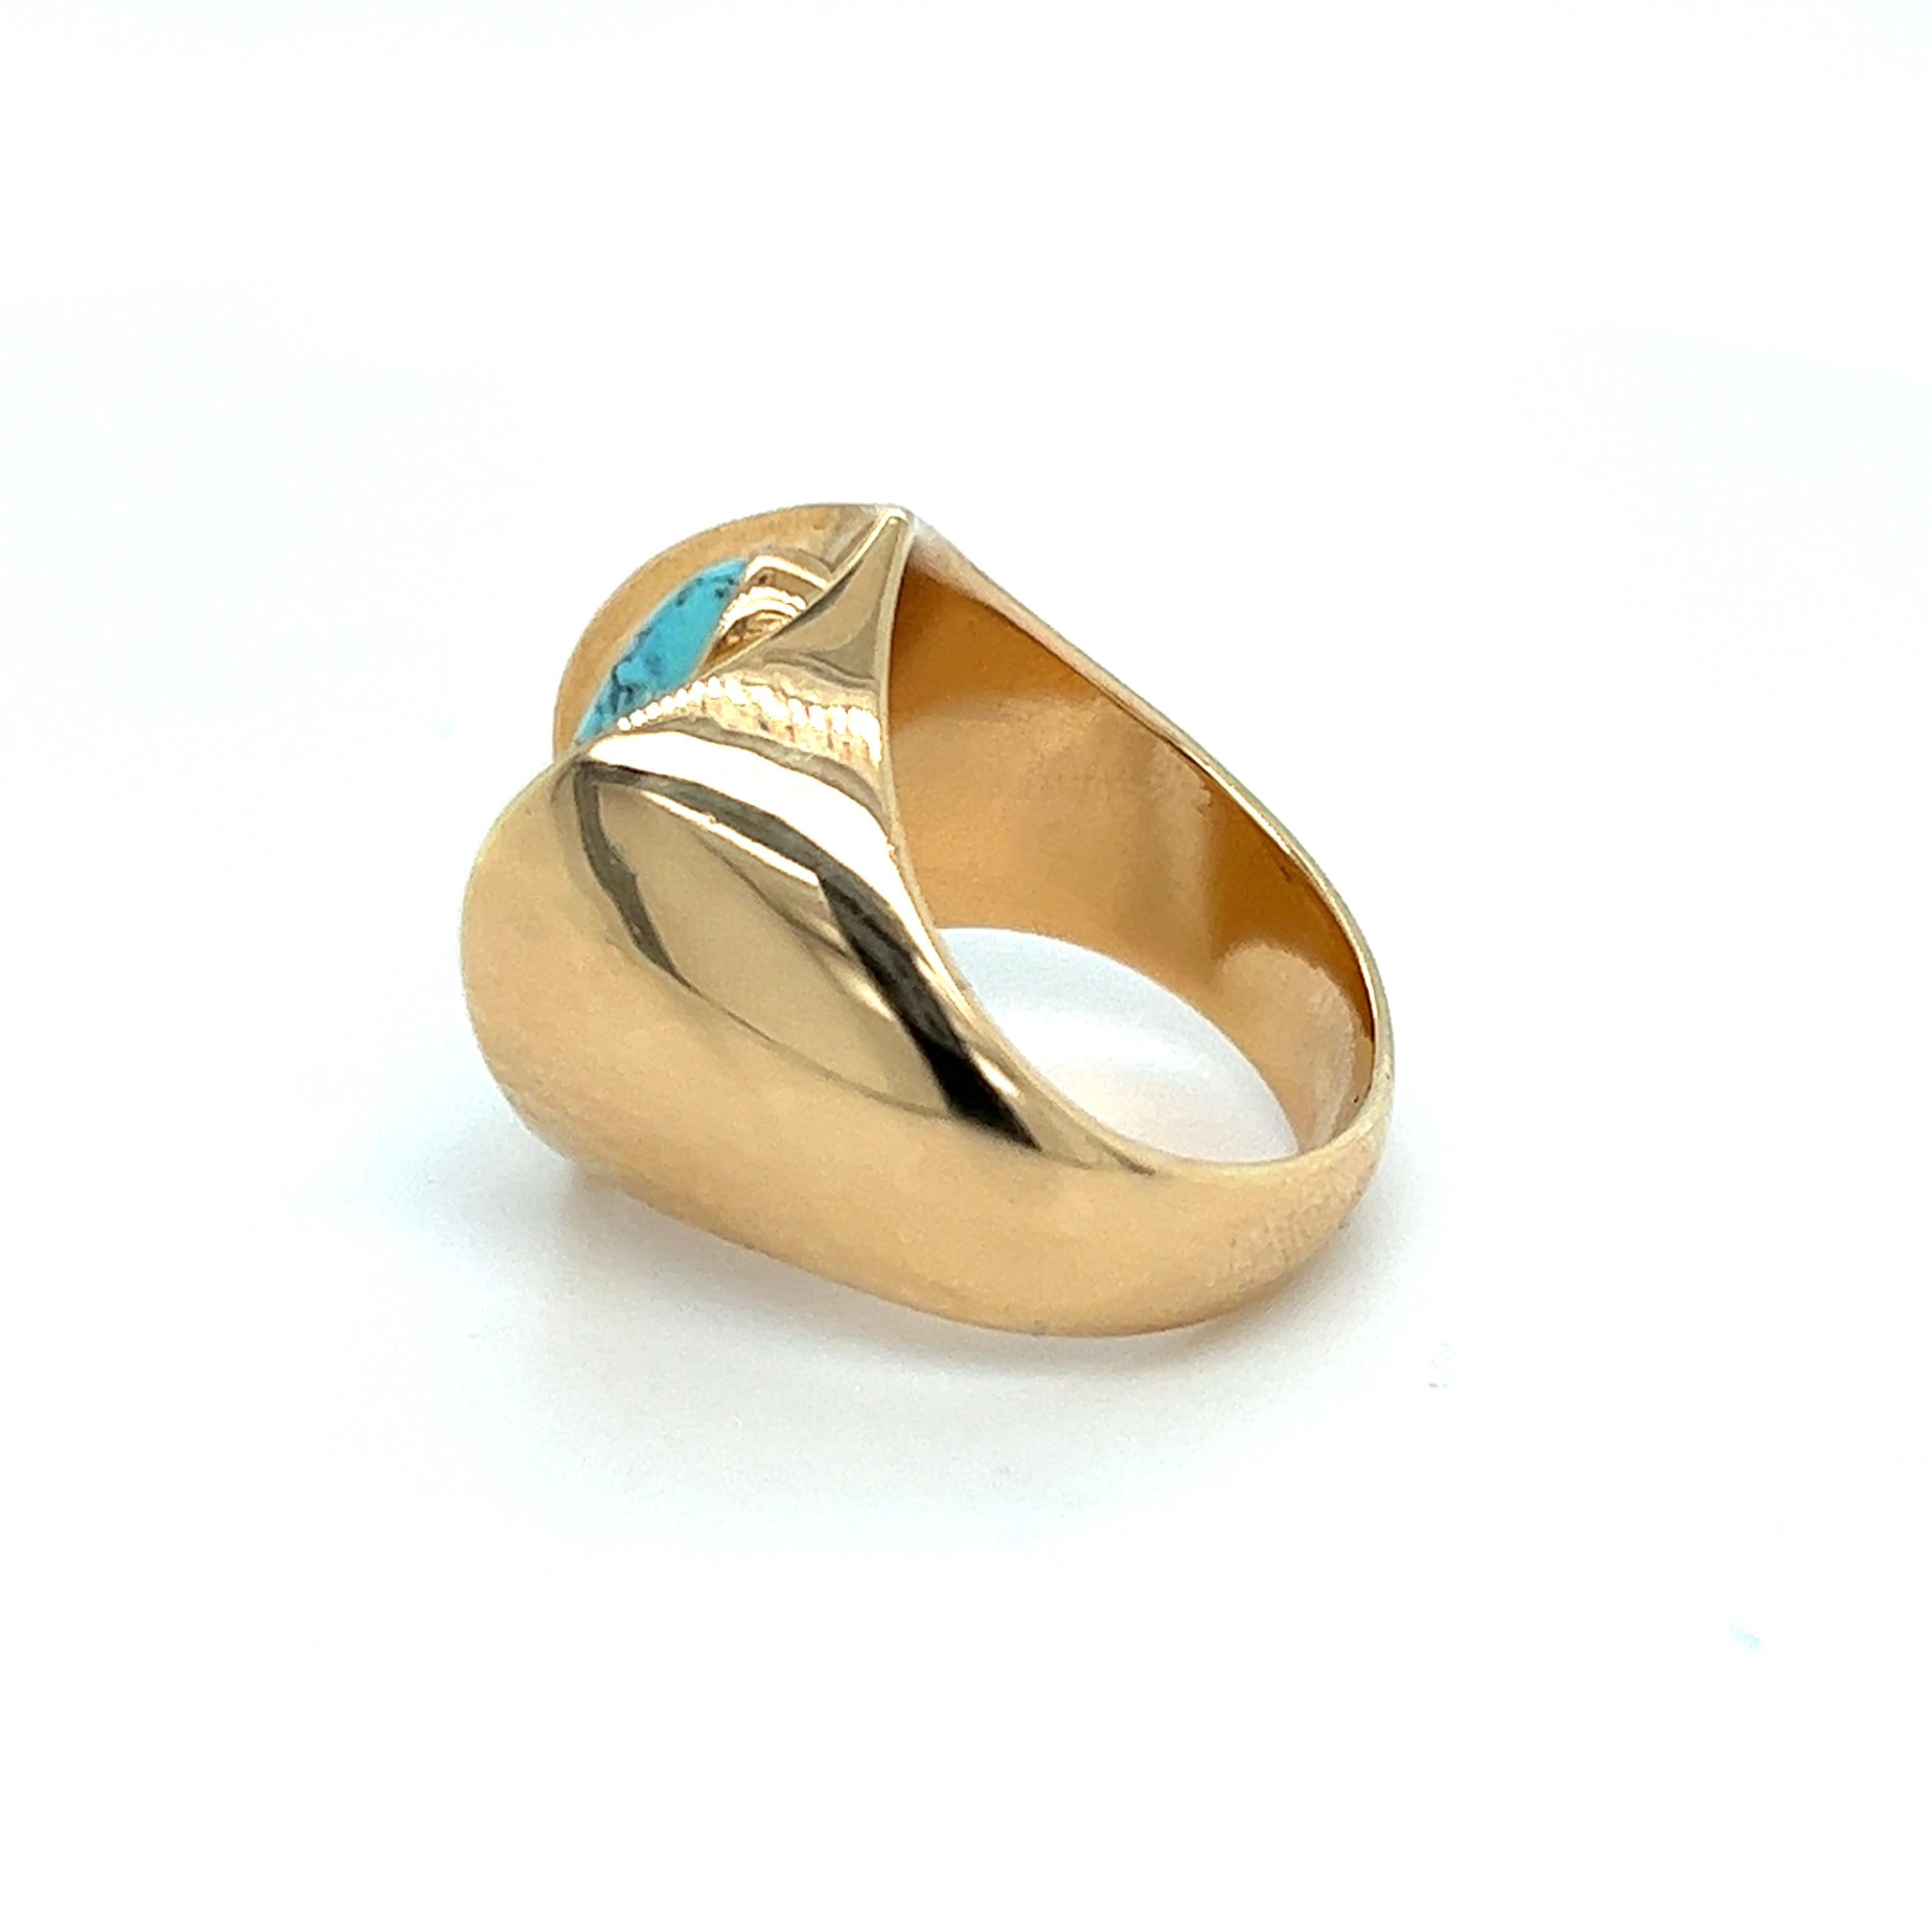 Marquise Cut Poul Warmind Denmark Modernist Turquoise Ring in 18k Gold